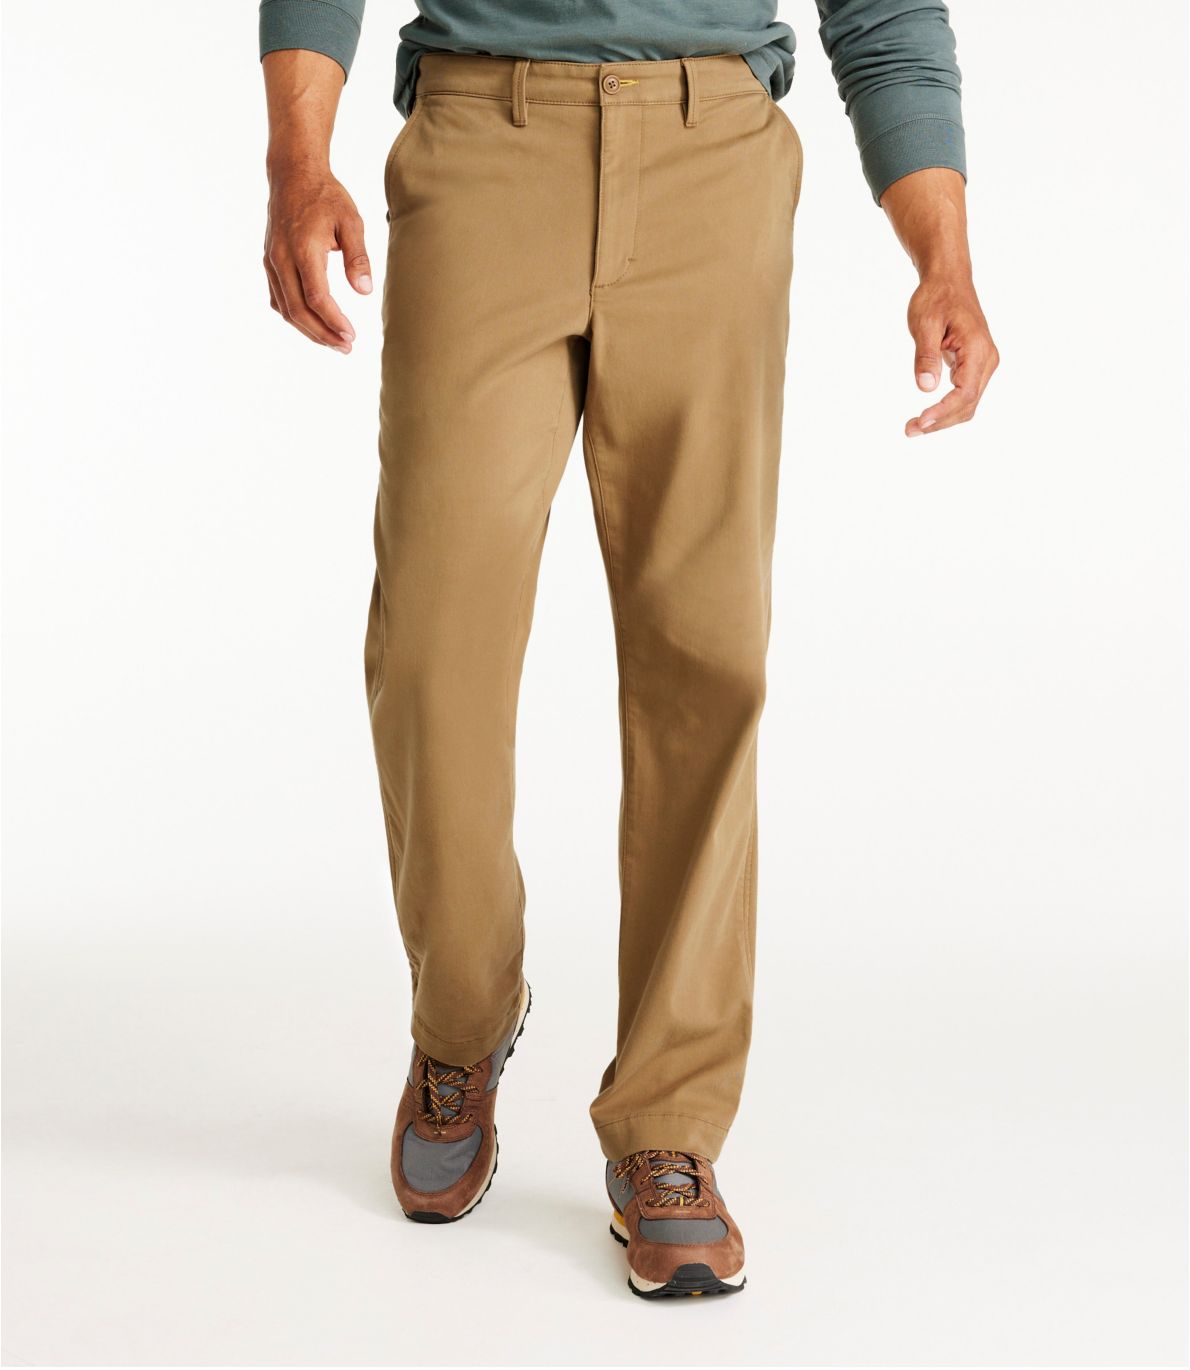 Men's Comfort Stretch Chino Pants, Classic Fit